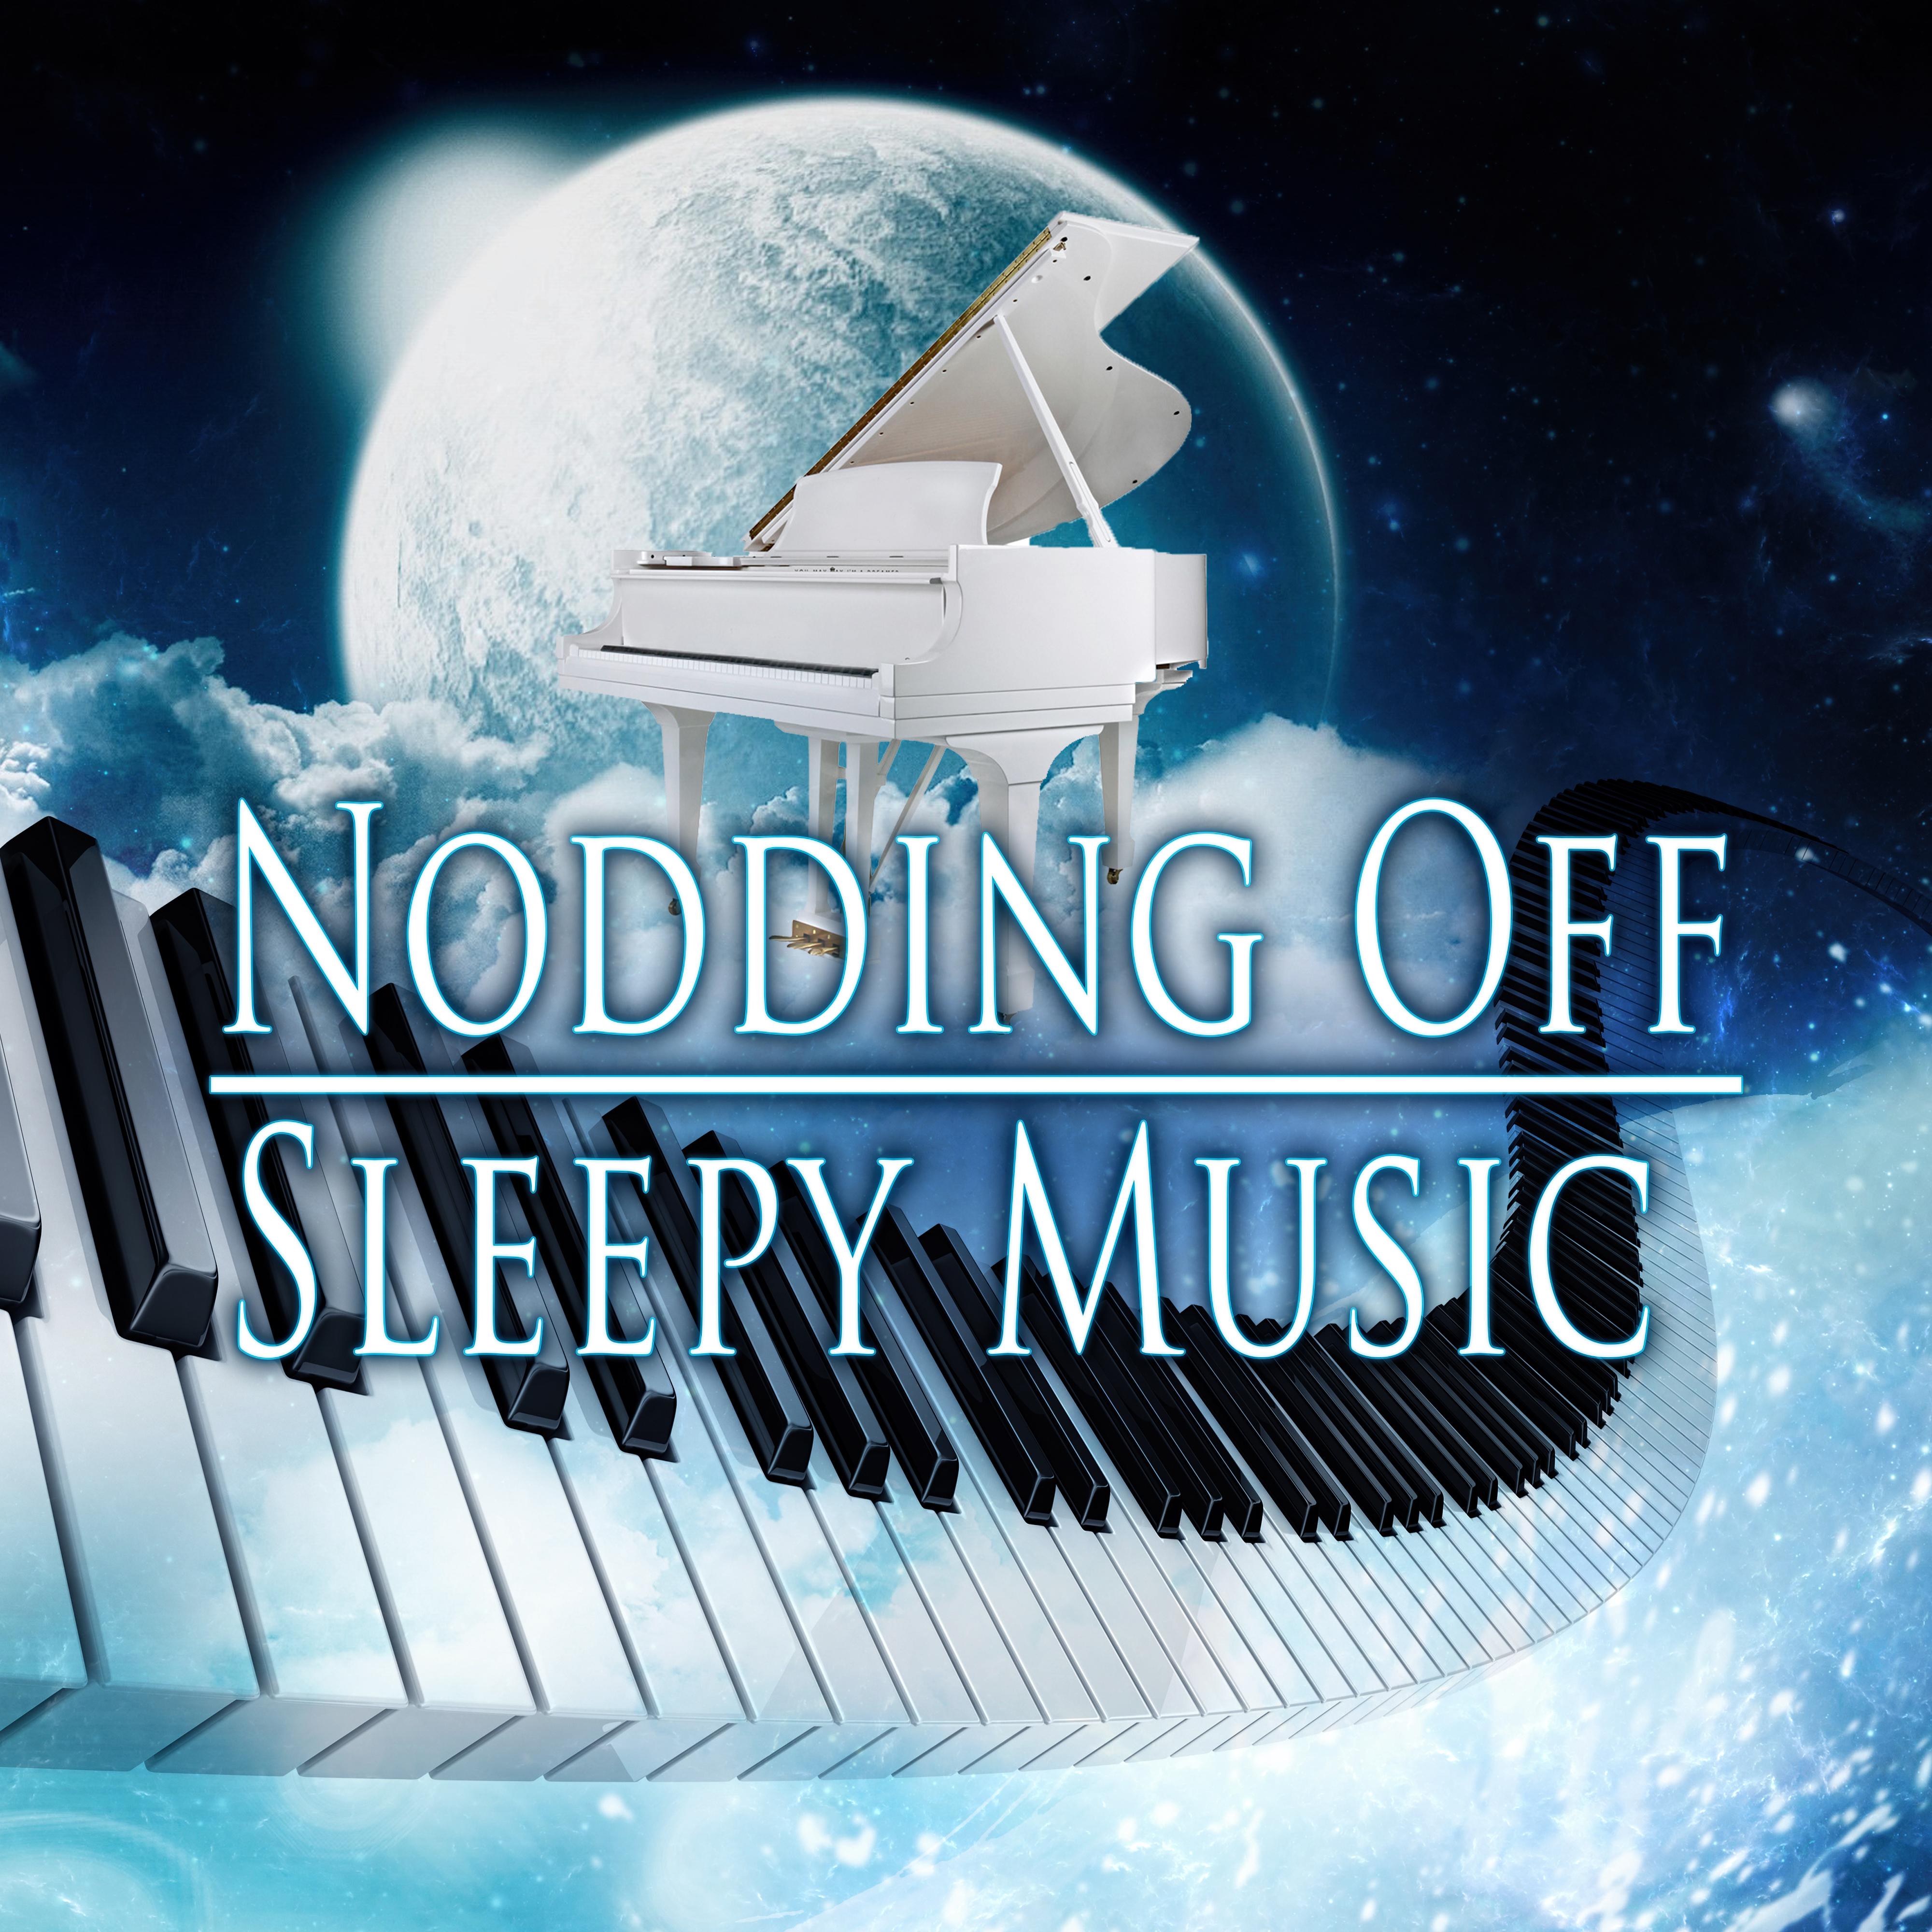 Nodding Off: Sleepy Music  Tranquil Piano Songs for Relax  Deep Sleep, Nap Time, Stress Relief, Inner Peace, Falling Asleep, Ultimate Insomnia Cures Lullabies